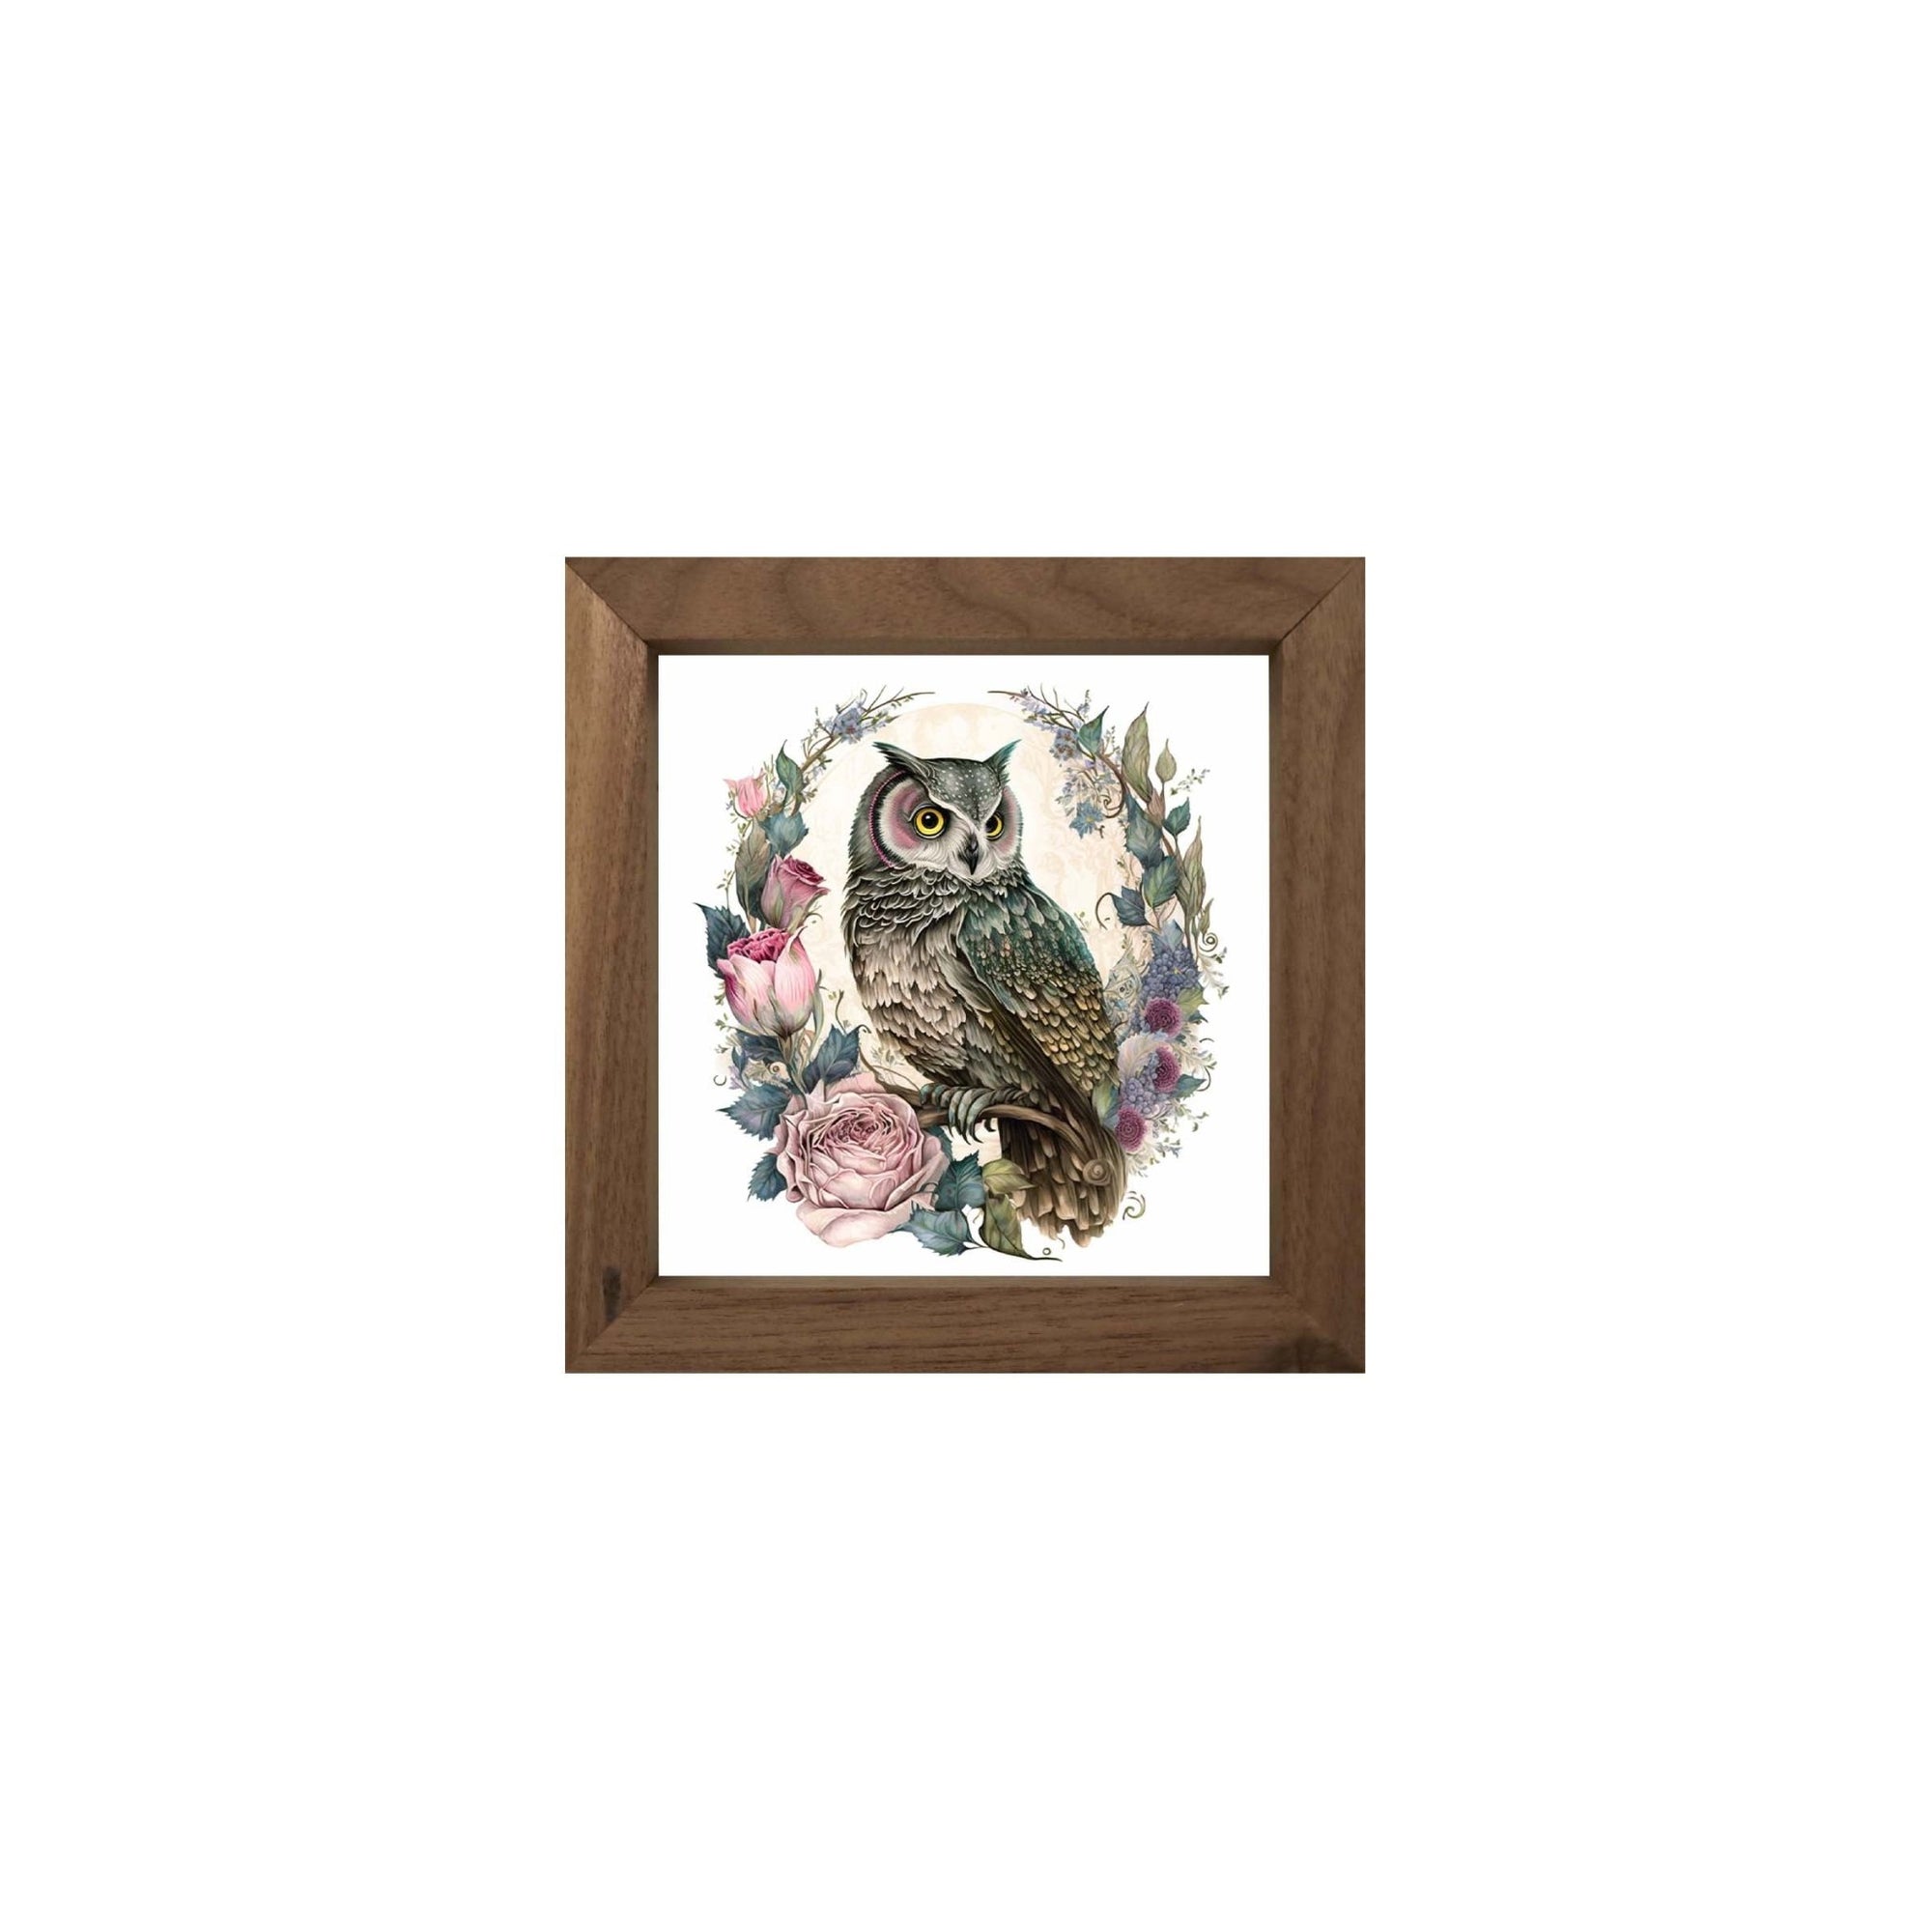 Owl Collection: 7x7 Wooden Wall Art Sign Framed Shadow Box| Large Owl2 - LifeSong Milestones